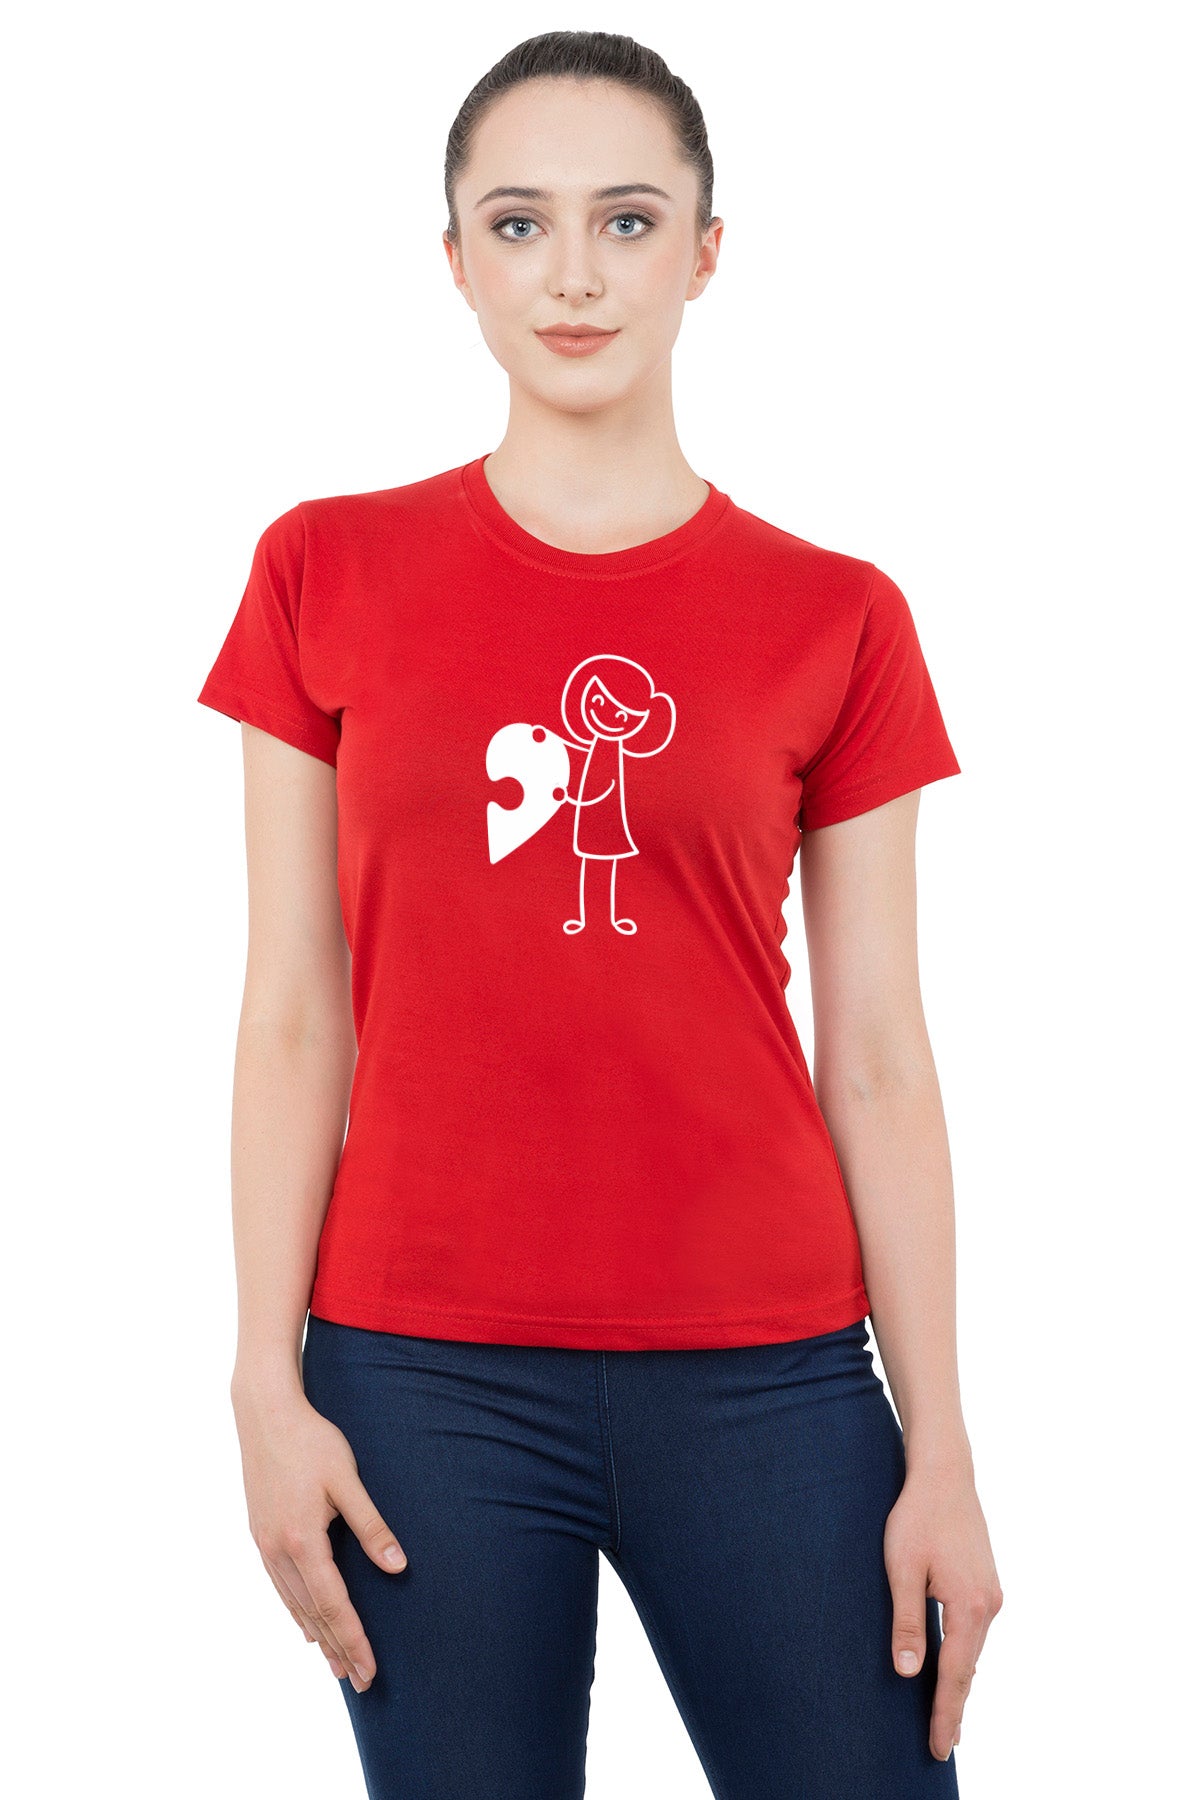 Love Puzzle matching Couple T shirts- Red